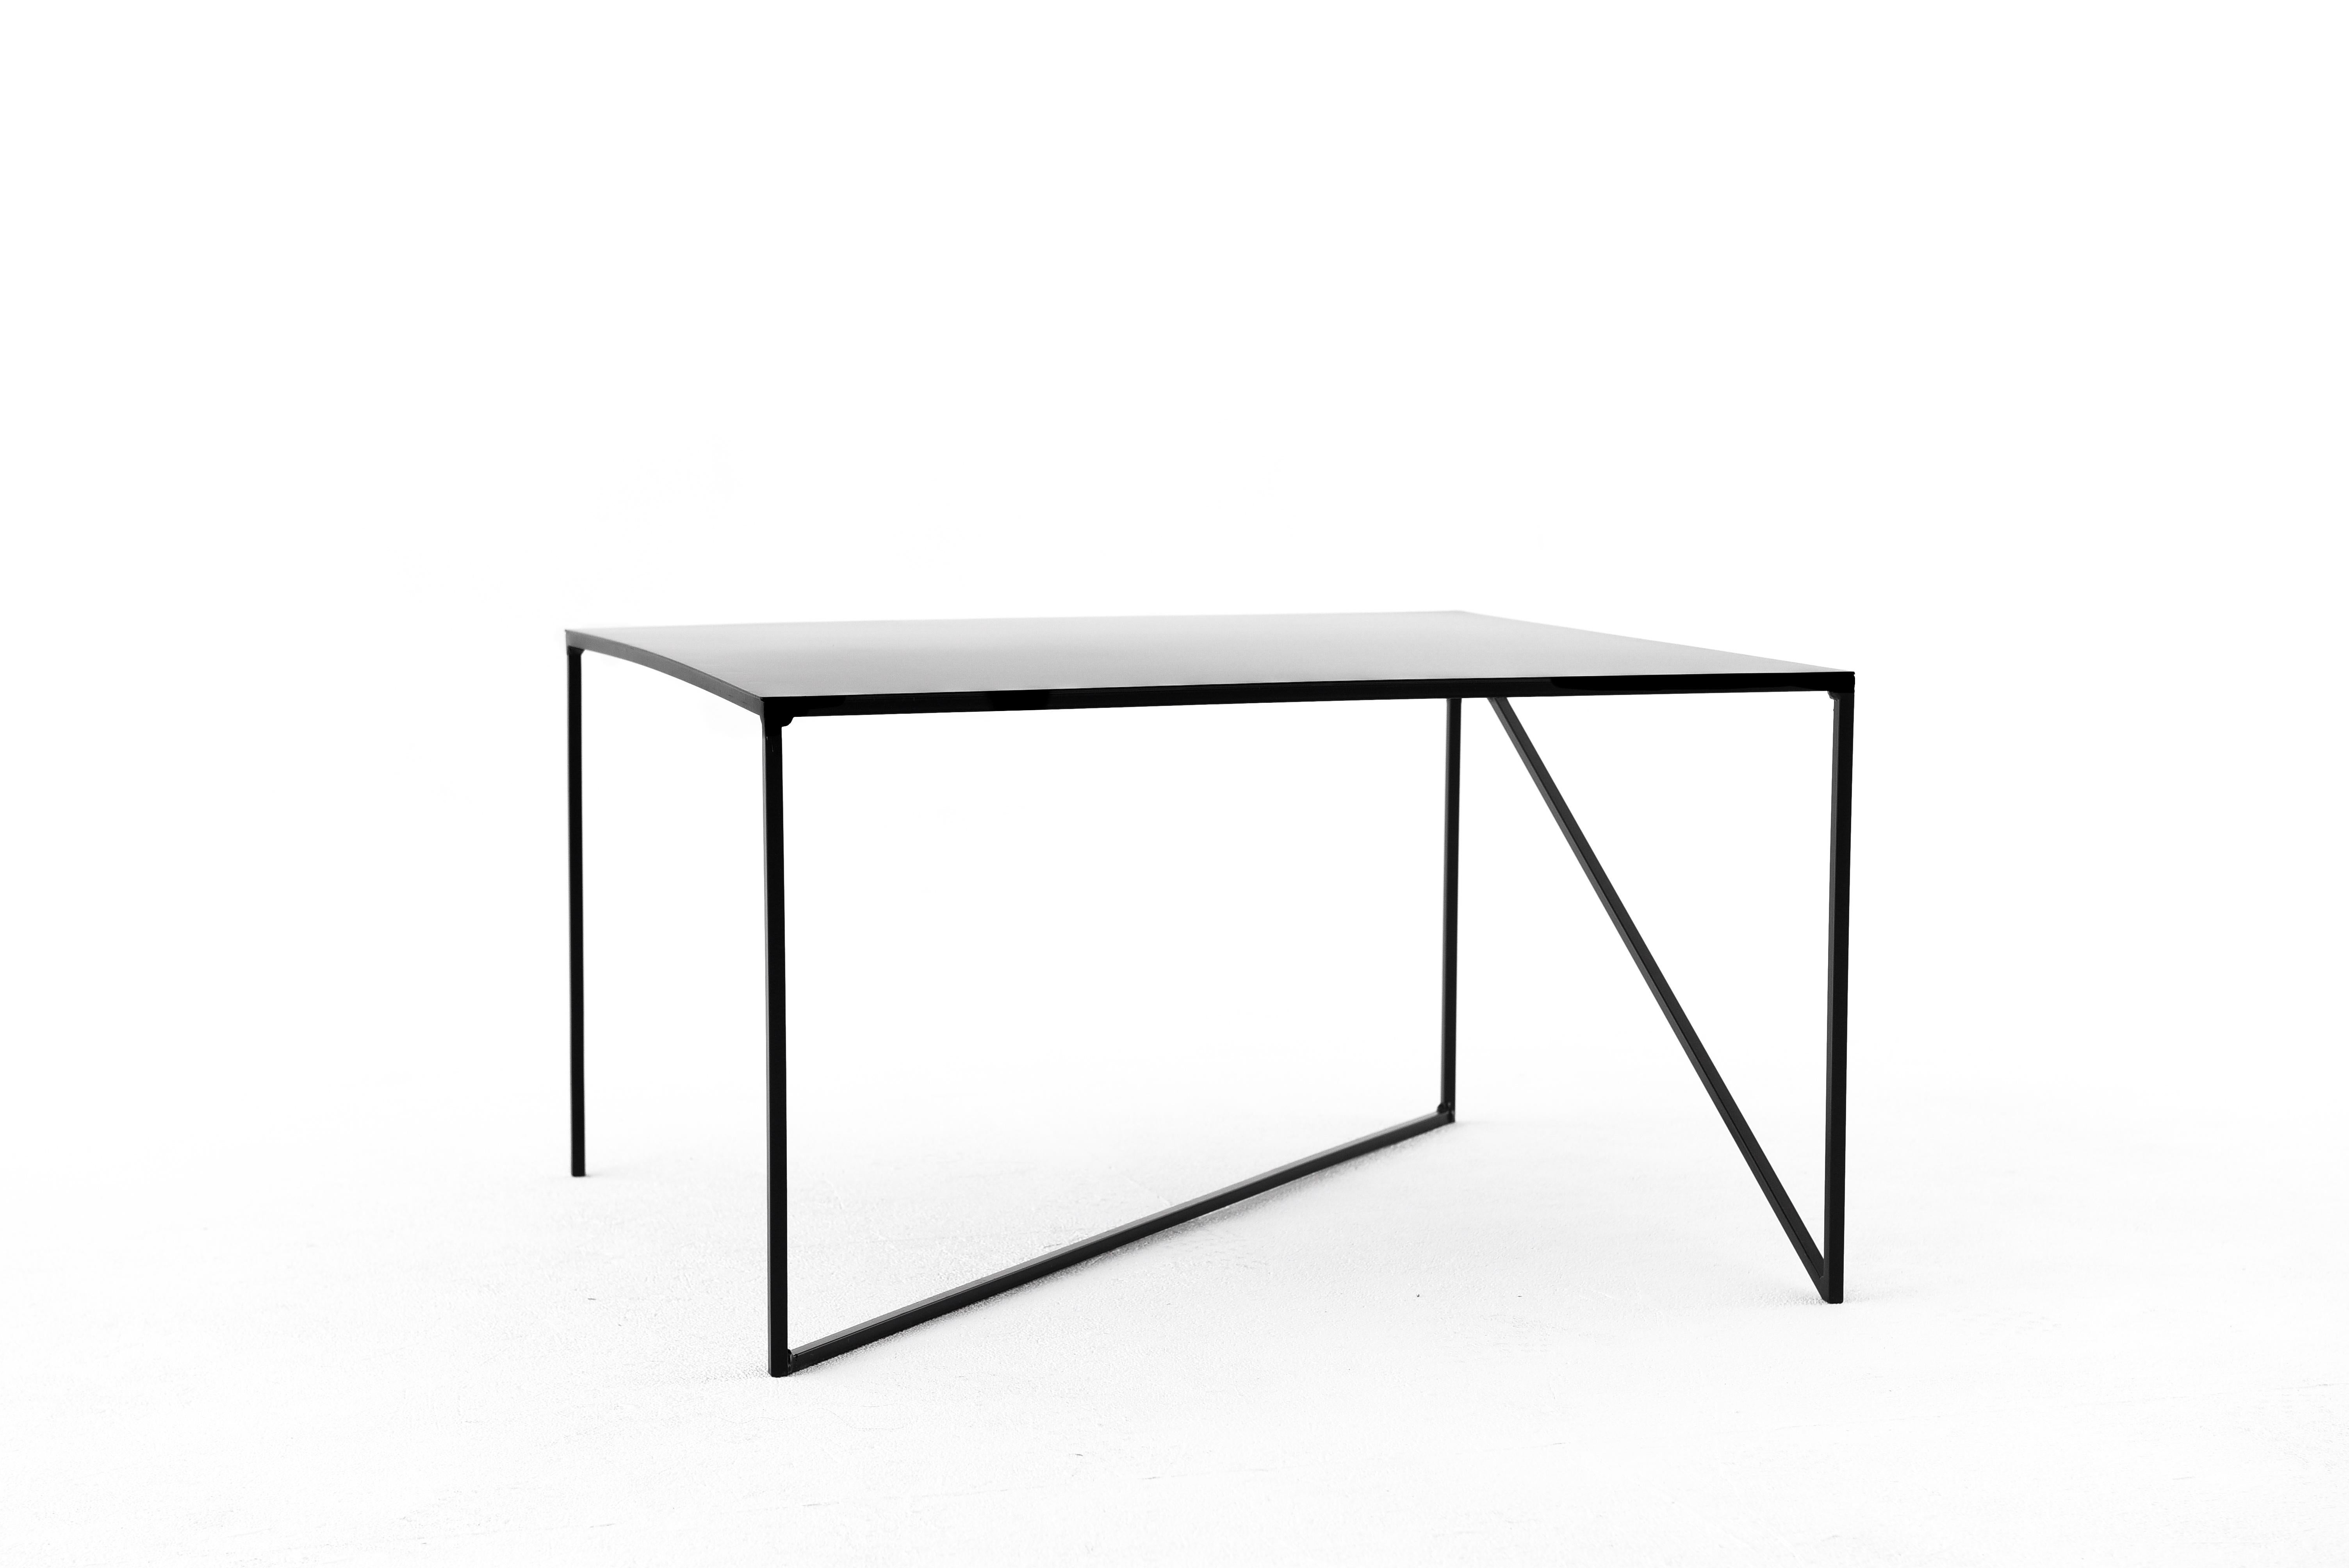 Object 013 Center Table by NG Design
Dimensions: D70 x W70 x H40 cm
Materials: Powder coated steel.

Also Available: All of objects available in different materials and colors on demand.

The 